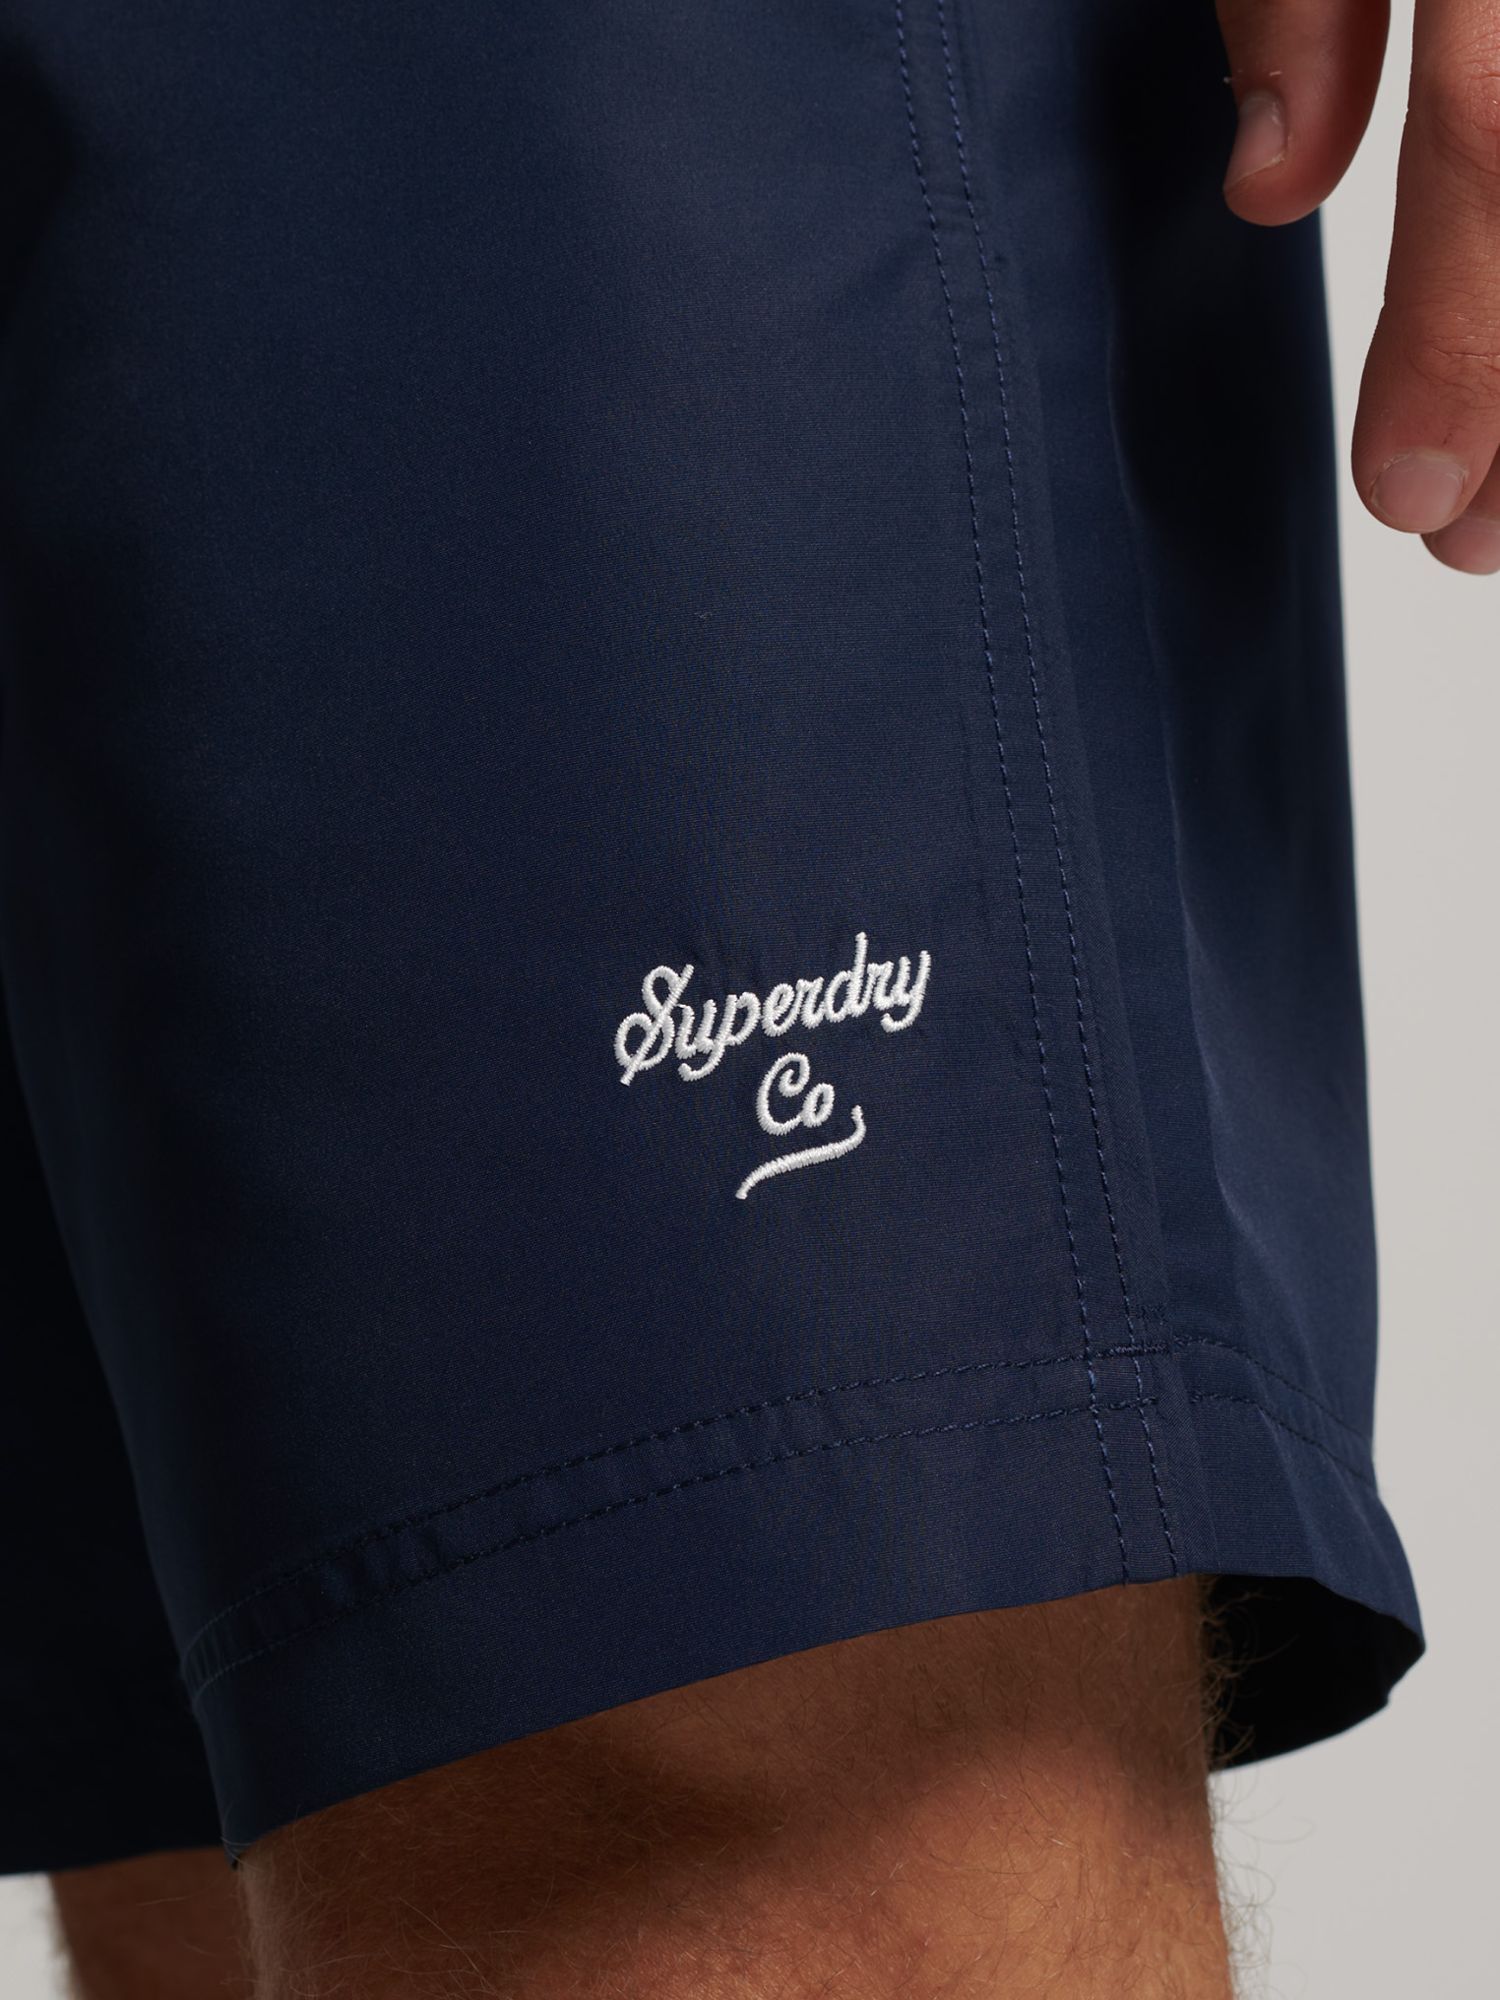 Buy Superdry Polo Swim Shorts Online at johnlewis.com